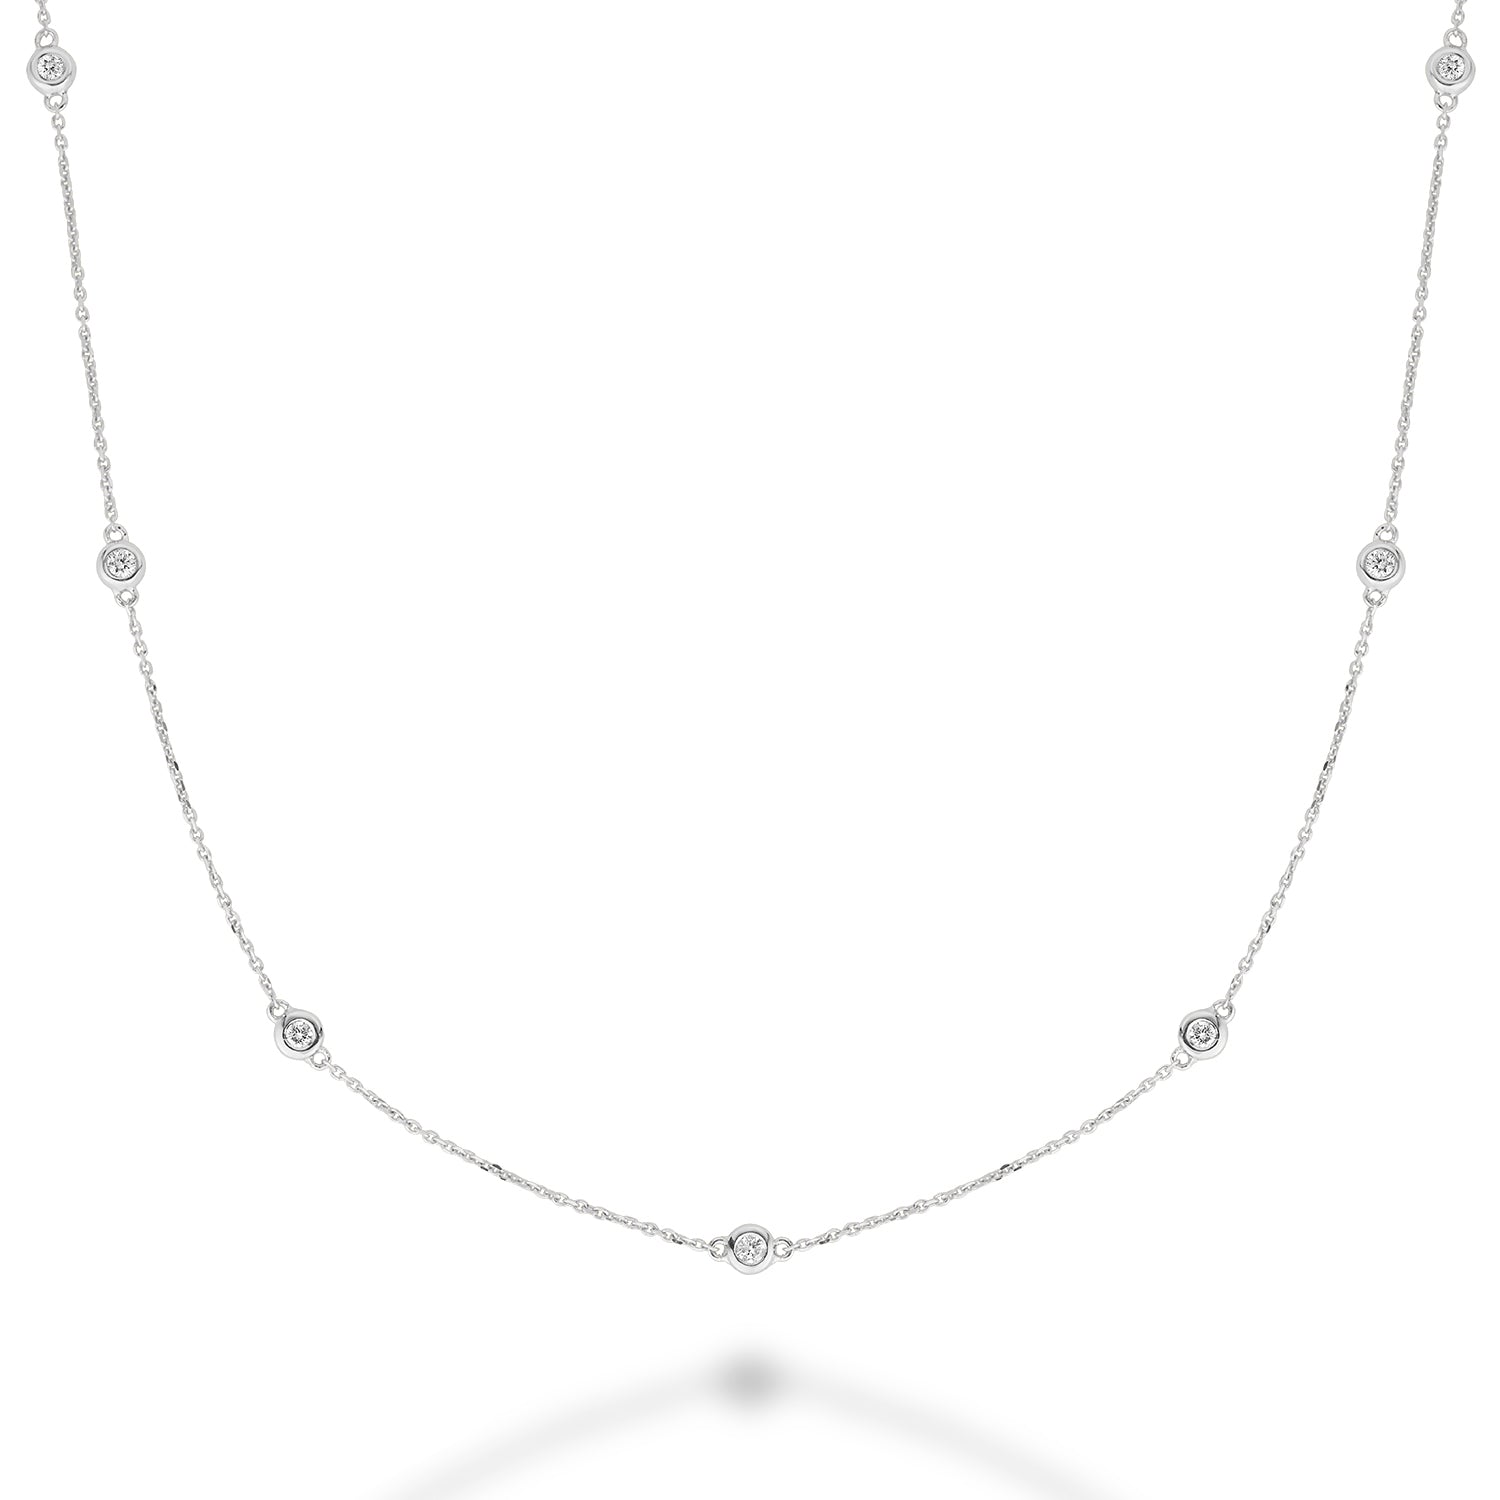 Hemsleys Collection 14K Diamonds-By-The-Yard Necklace